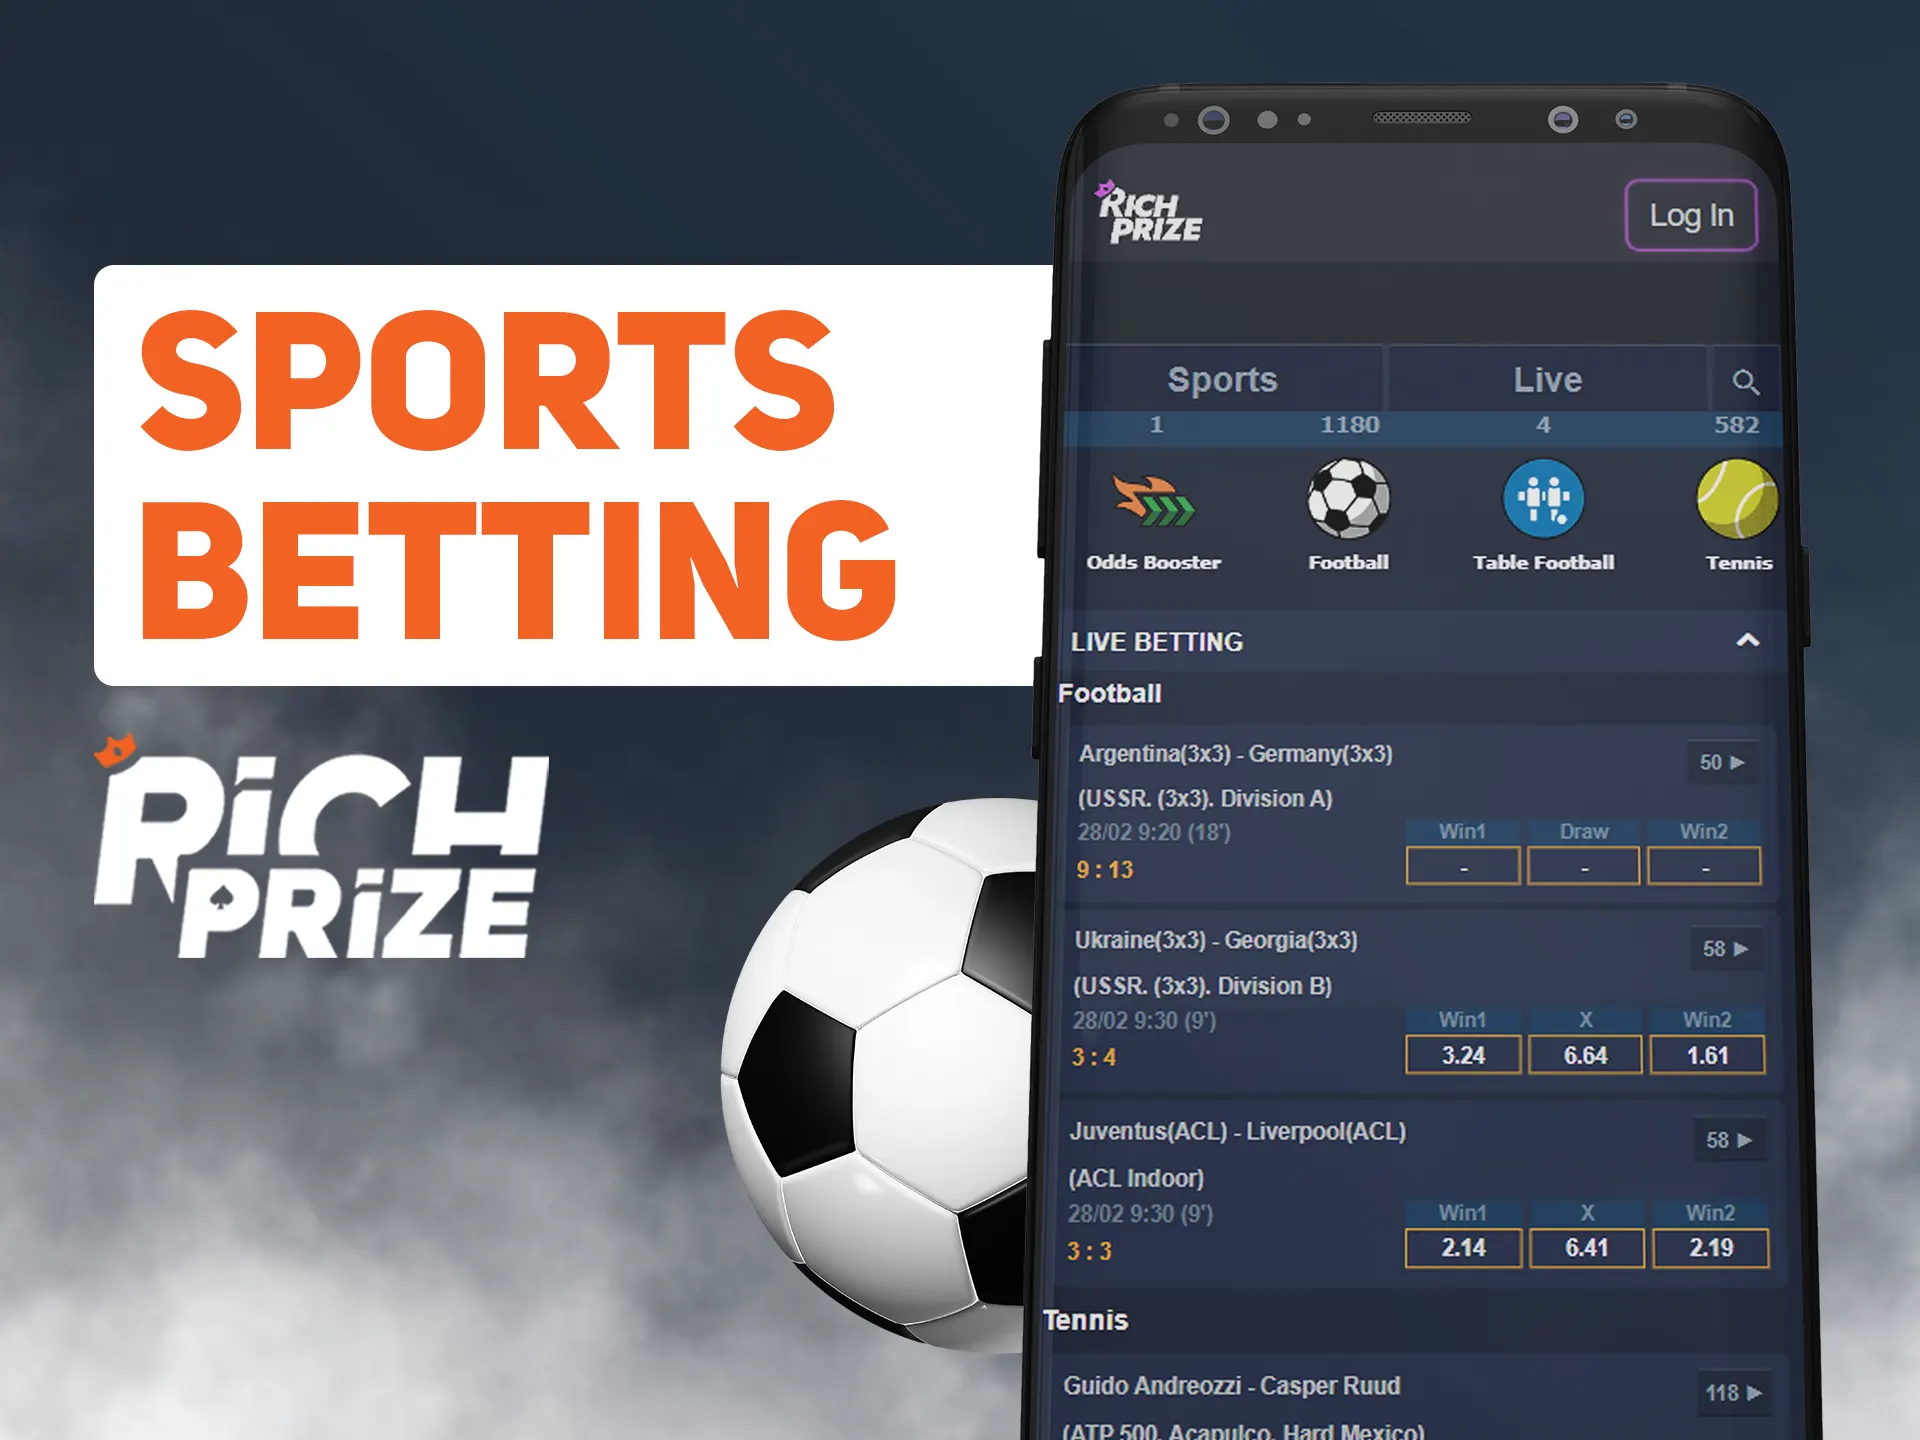 Bet on any type of sports in Richprize app.